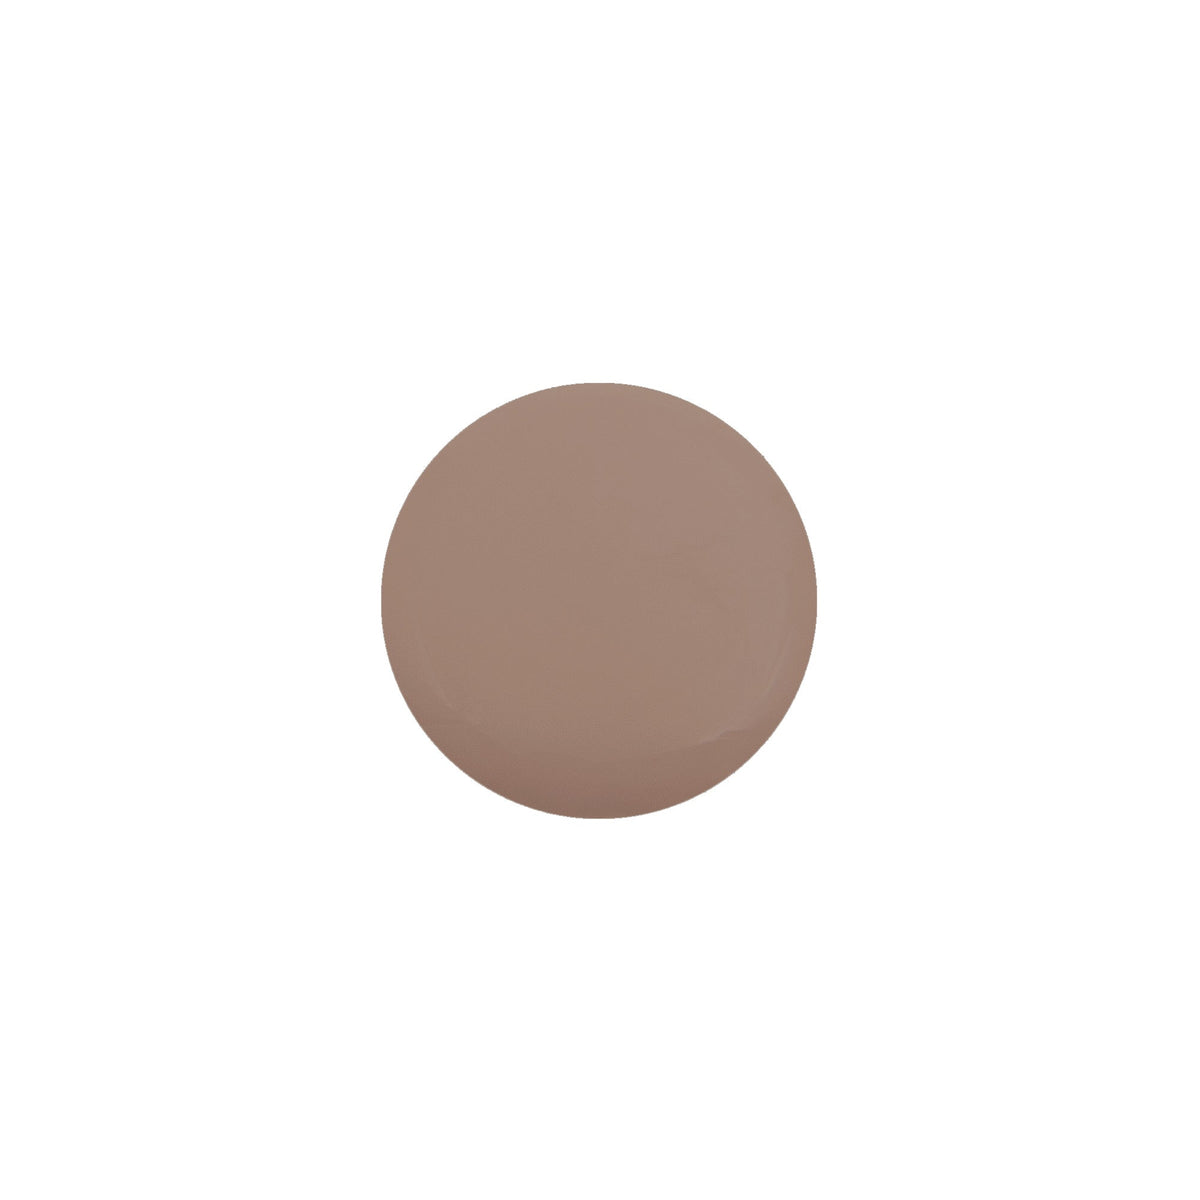 Mineral Fusion - Nail Polish - Taupe - by Mineral Fusion |ProCare Outlet|